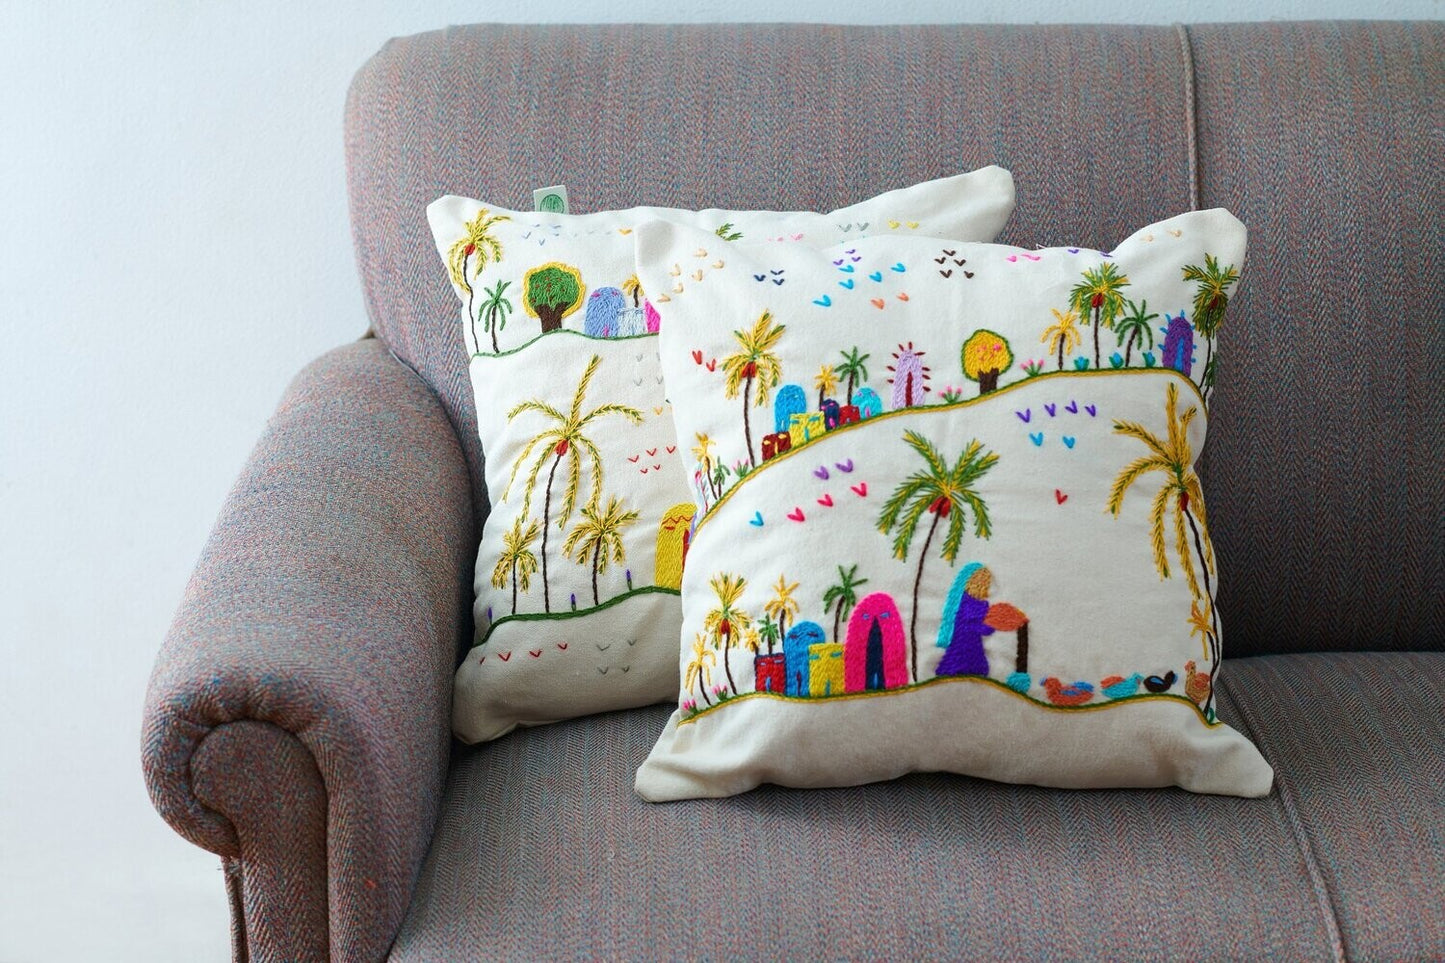 Rustic embroidered cushion